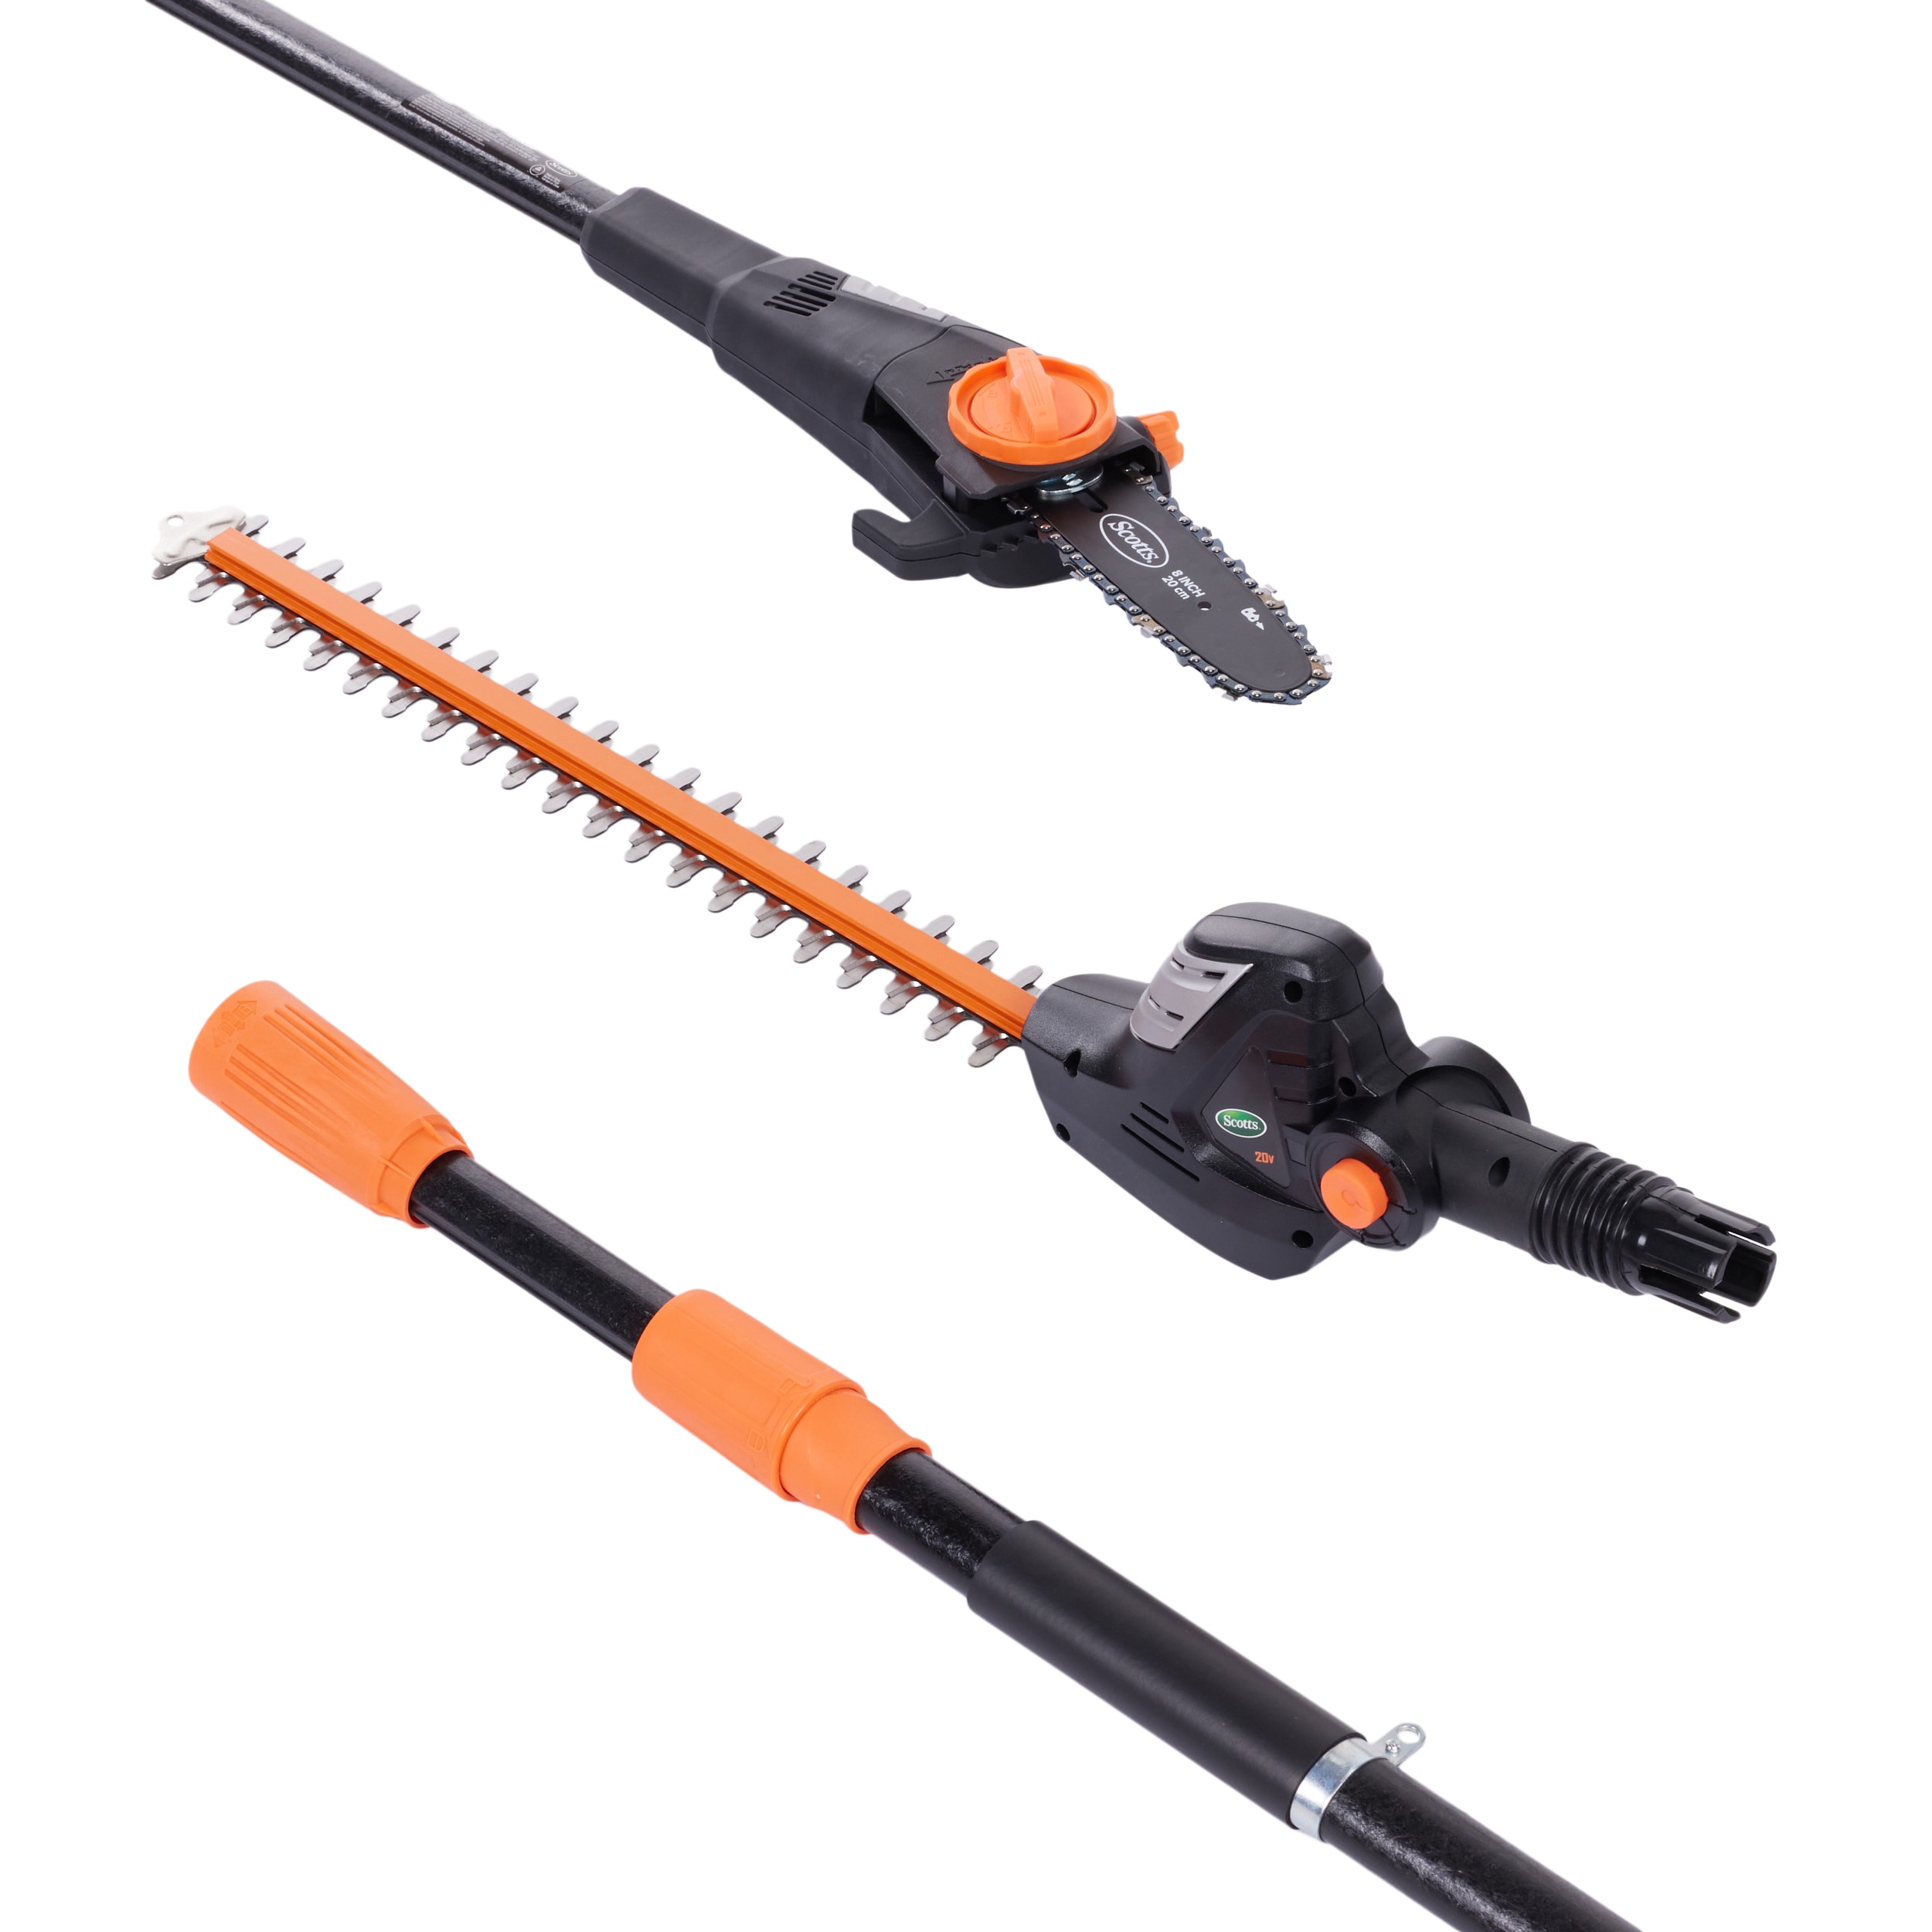 Scotts 2-in-1 Cordless Convertible Pole Saw / Hedge Trimmer with 2.0 Ah  Battery and Fast Charger CLPS40020S - 20V